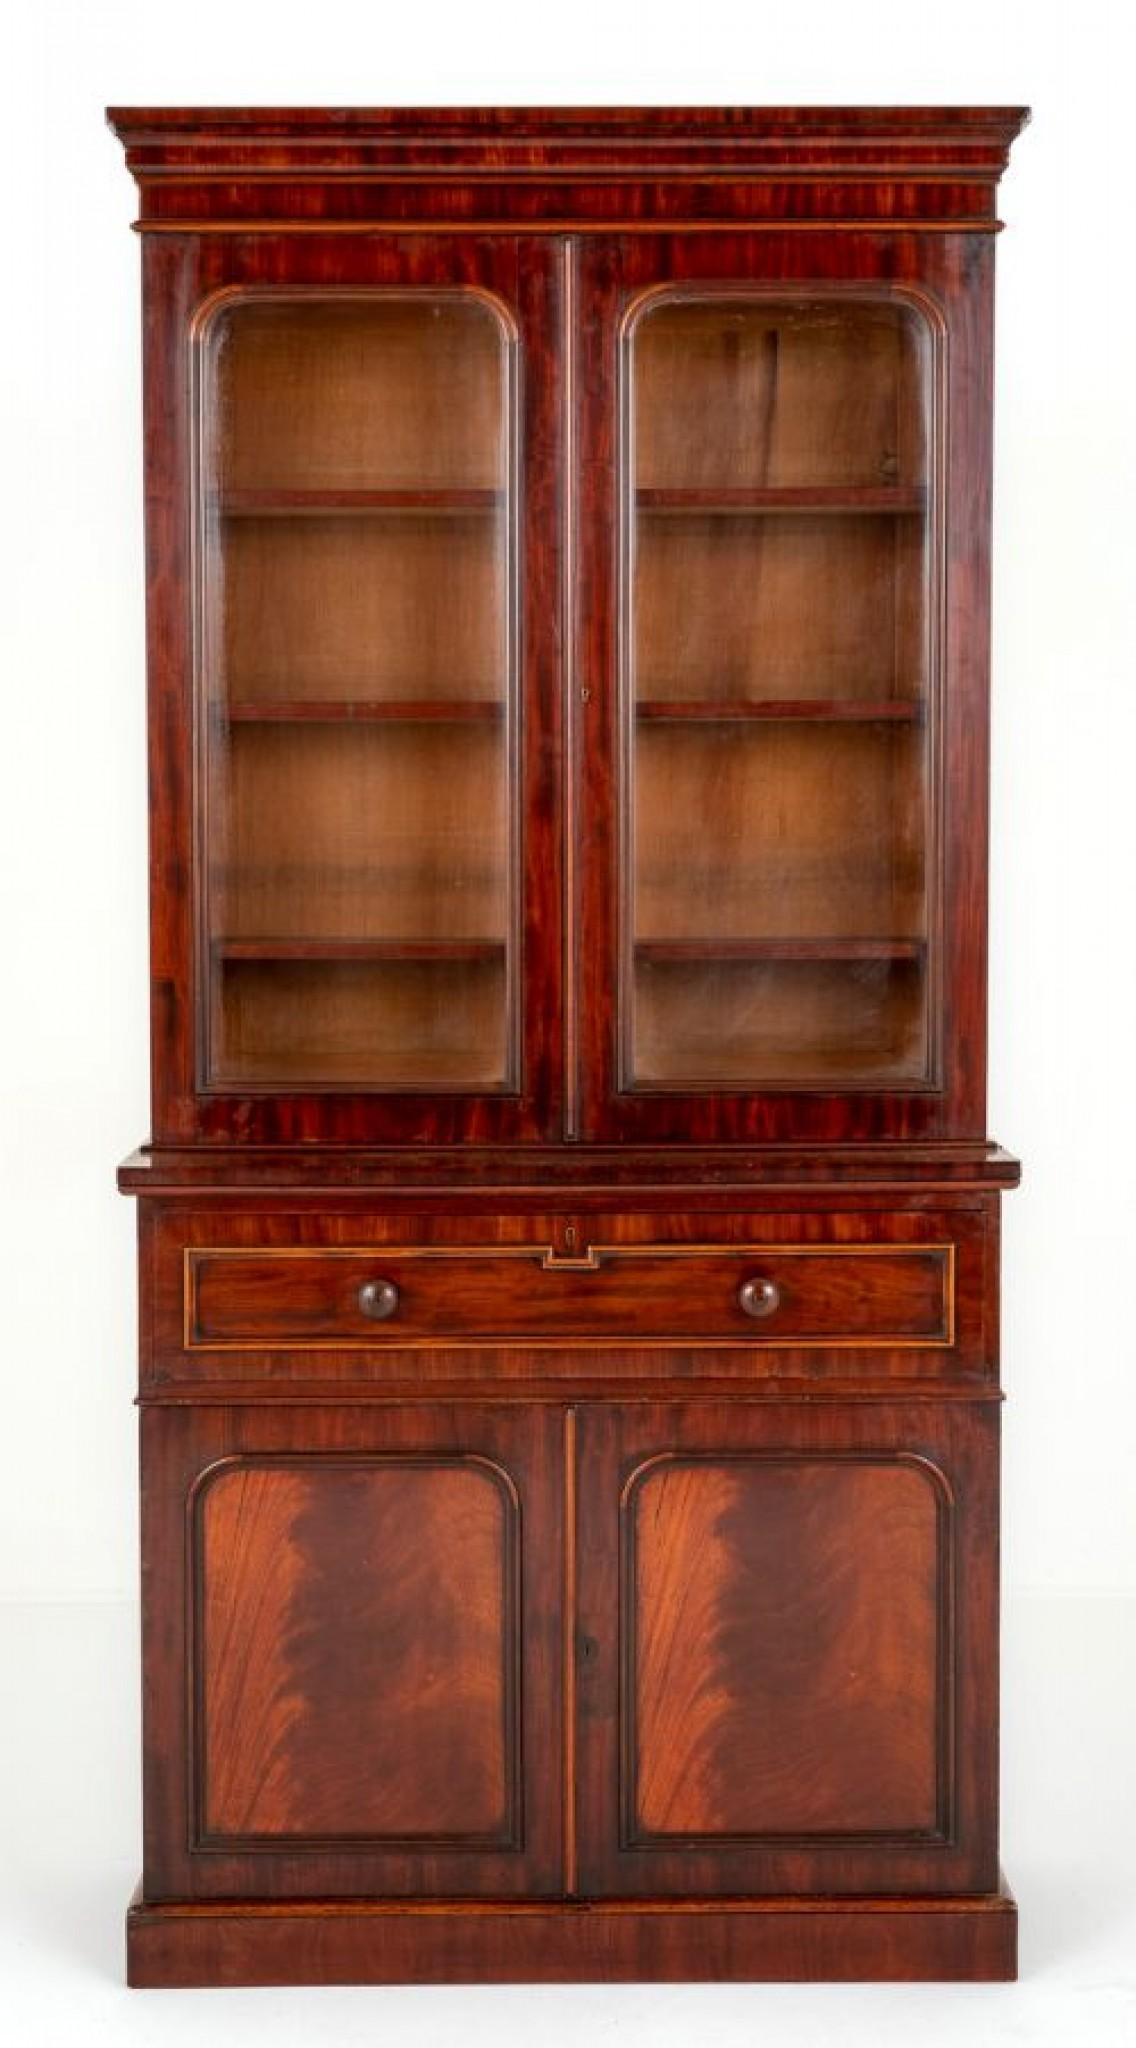 Victorian Mahogany Glazed Bookcase.
This Bookcase Stands upon a Plinth Base.
Circa 1860
The Lower Section Having 2 Paneled Doors, 1 Mahogany Lined Drawer with applied Moldings and Turned Knobs and Feature Decorative Flame Mahogany Veneers.
The Upper